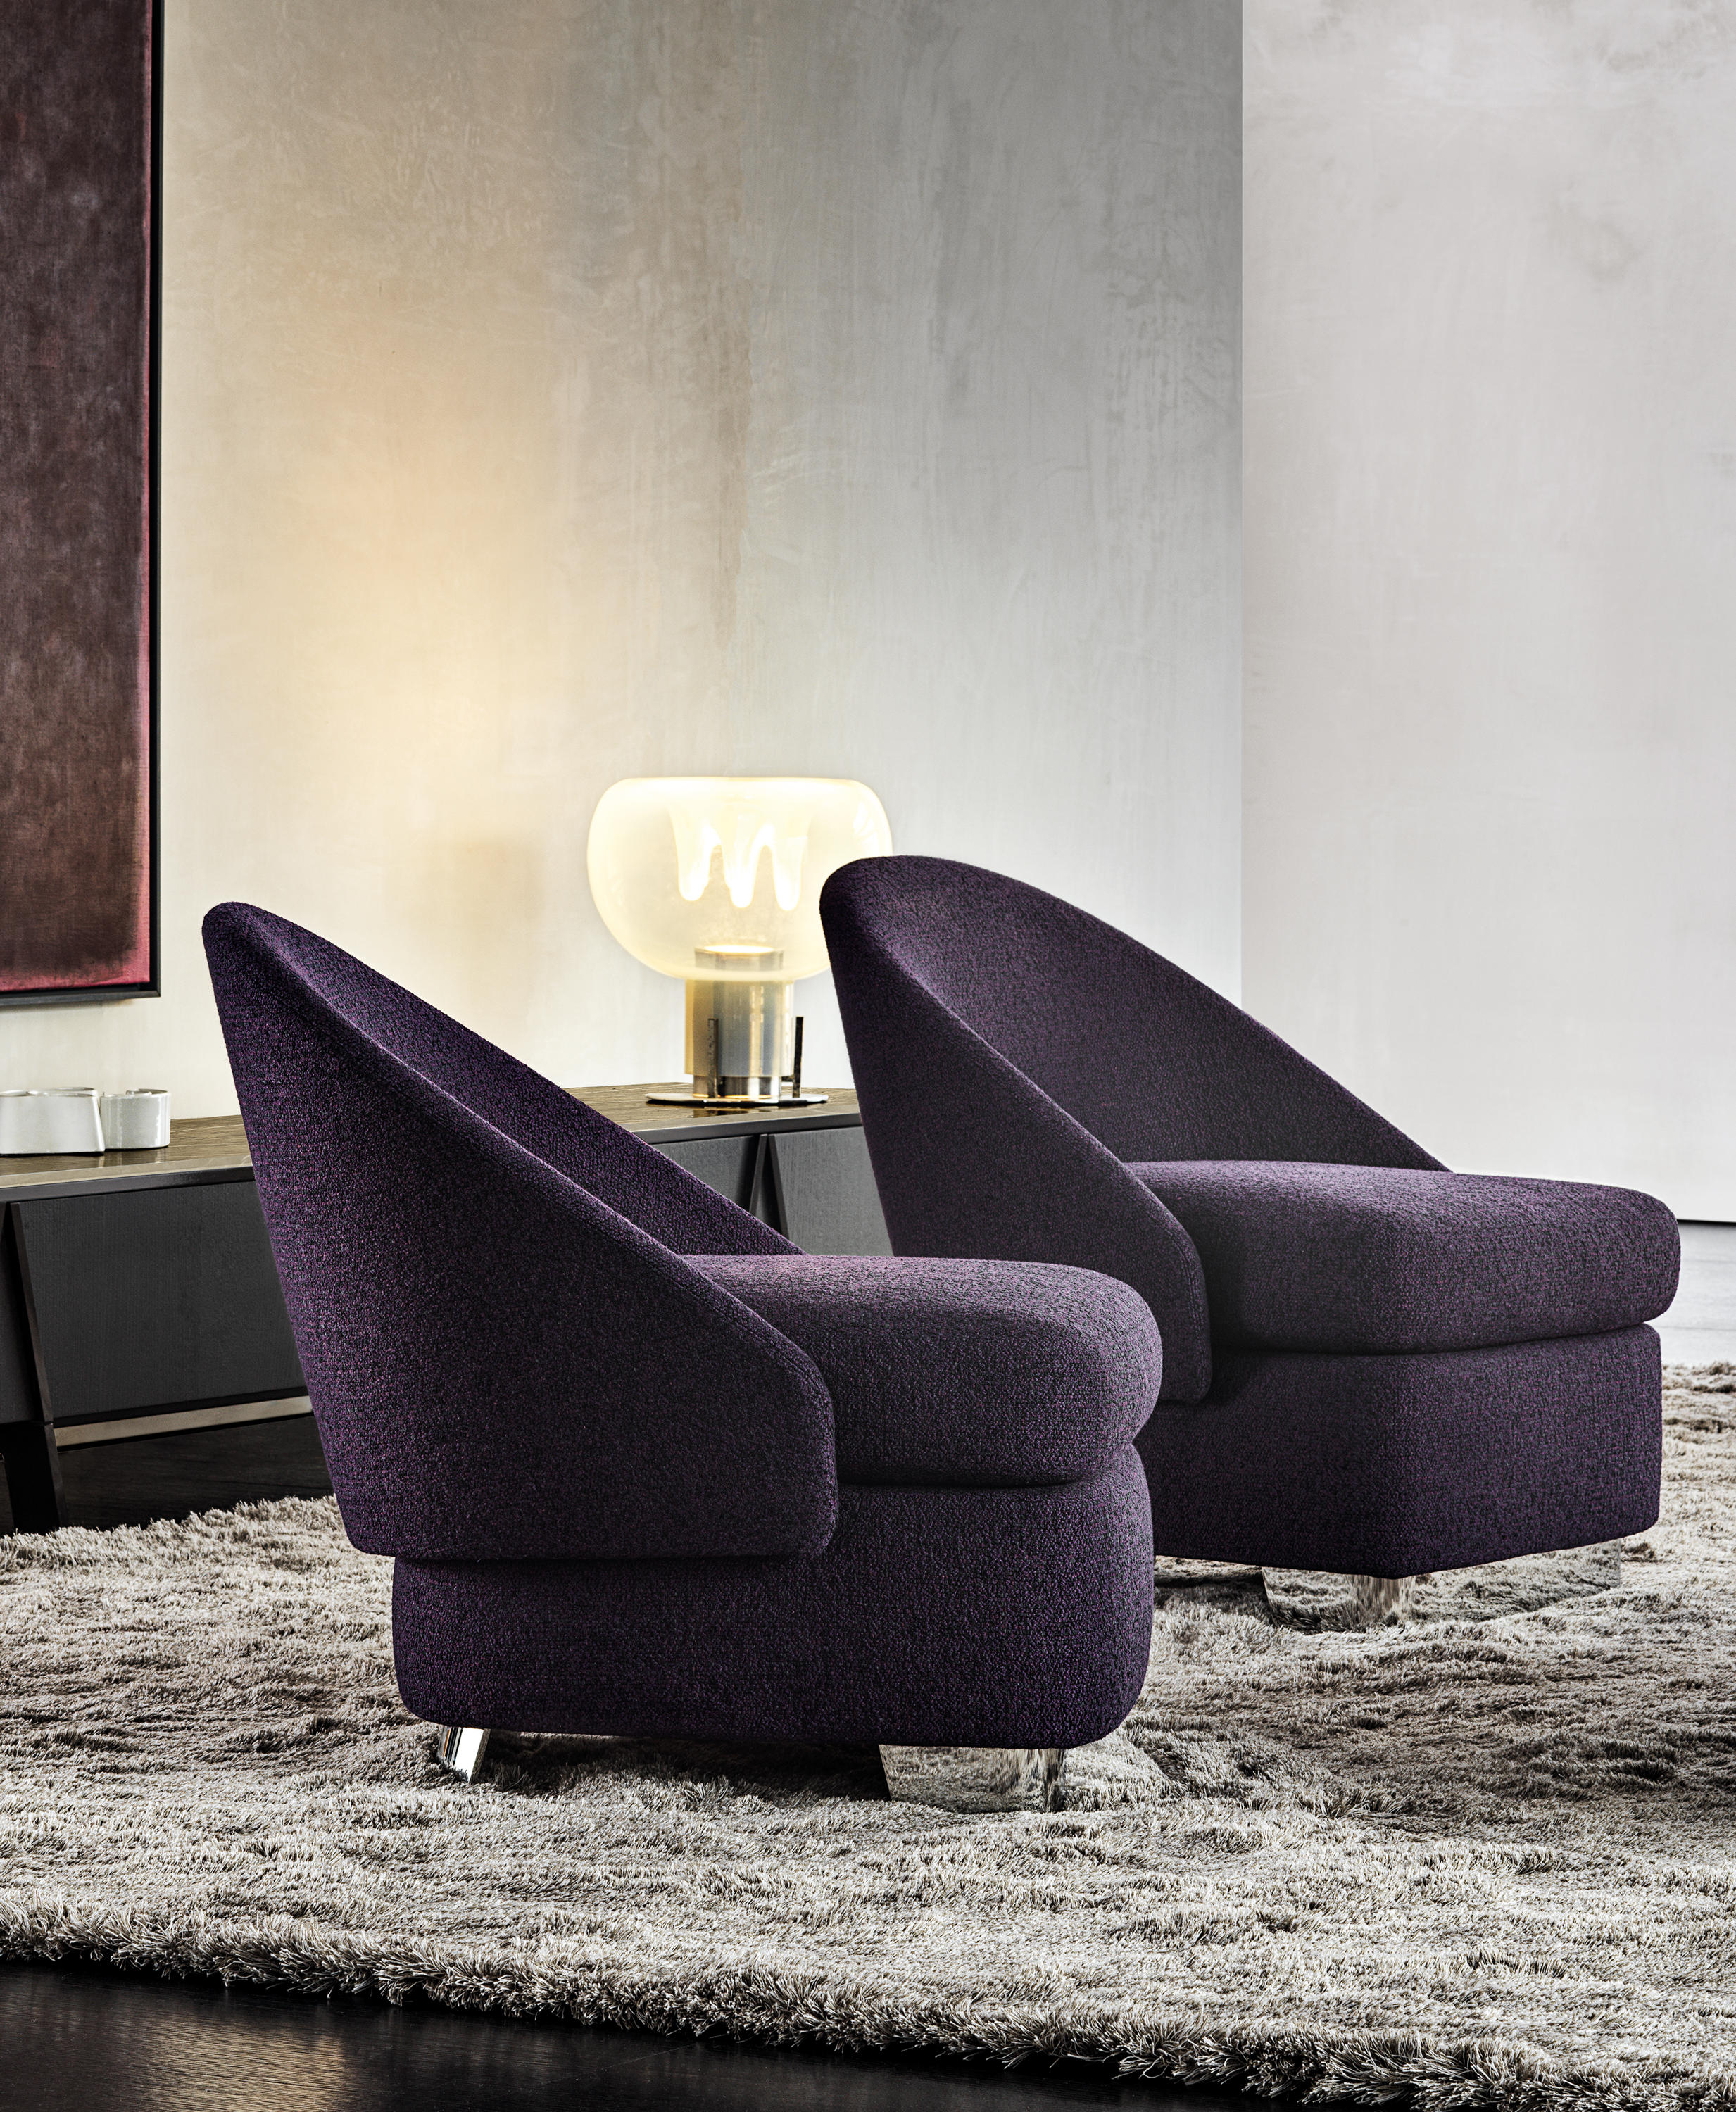 Lawson Seating Collection by Rodolfo Dordoni for Minotti